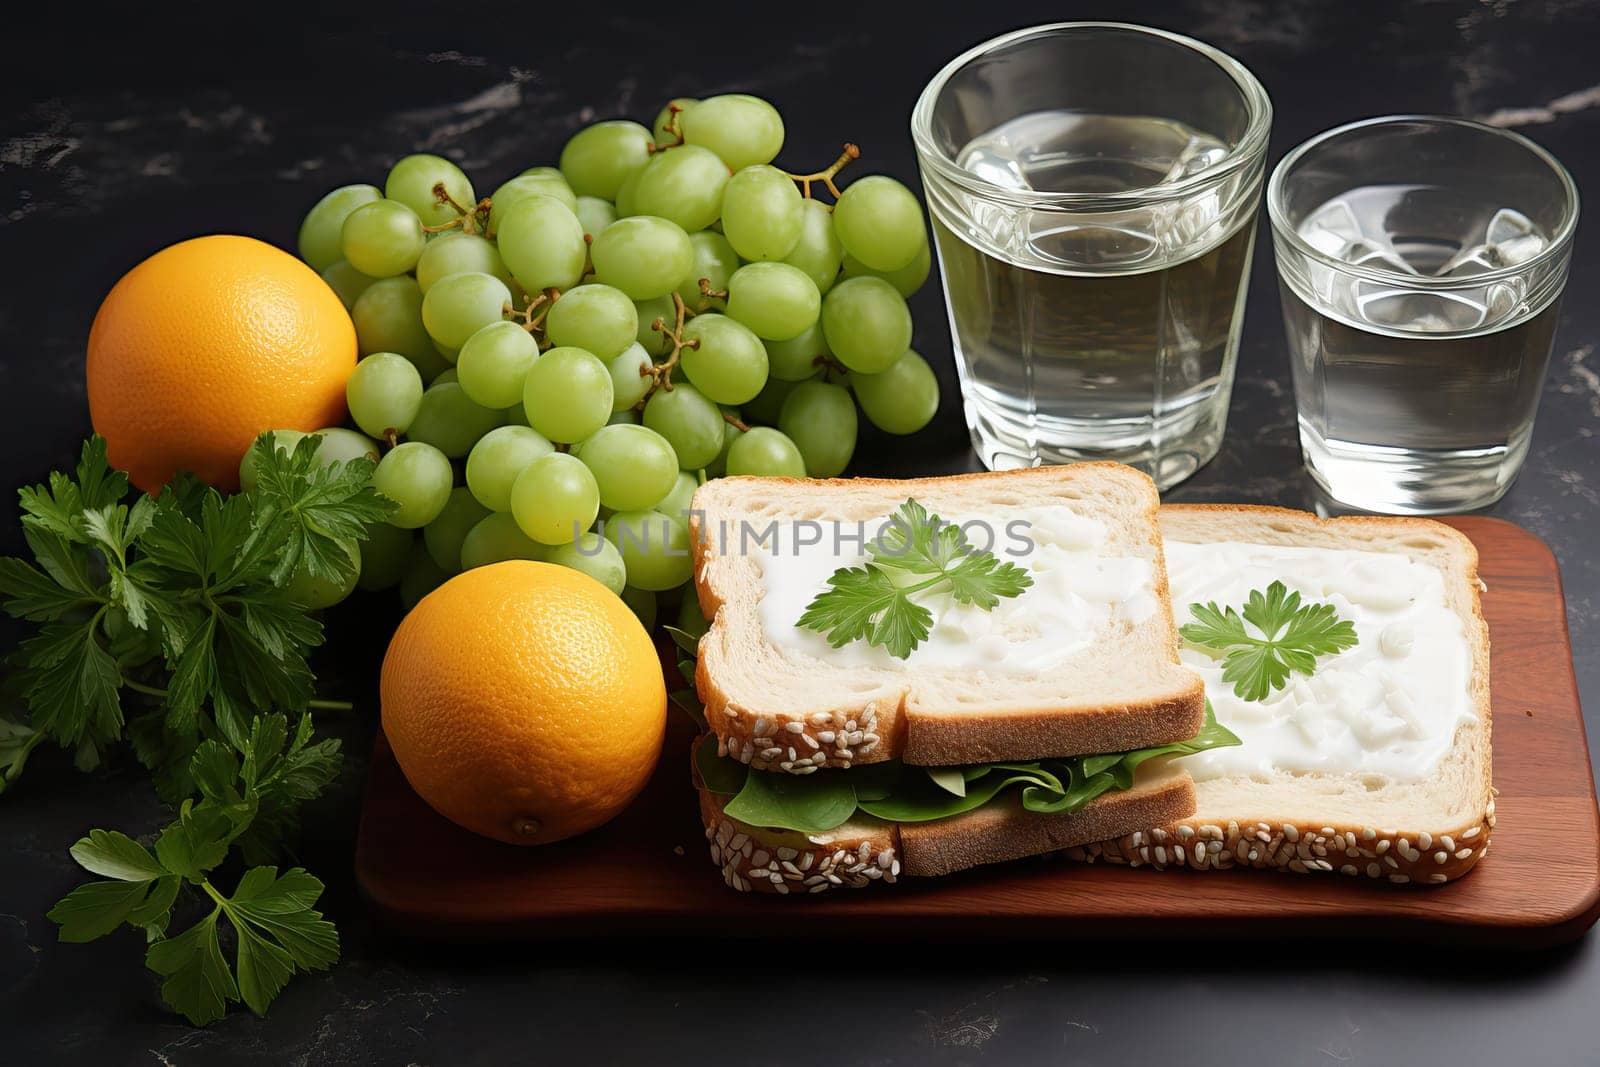 A sandwich with greens, grapes and an orange, two glasses of water on the breakfast table, the table cover is black.